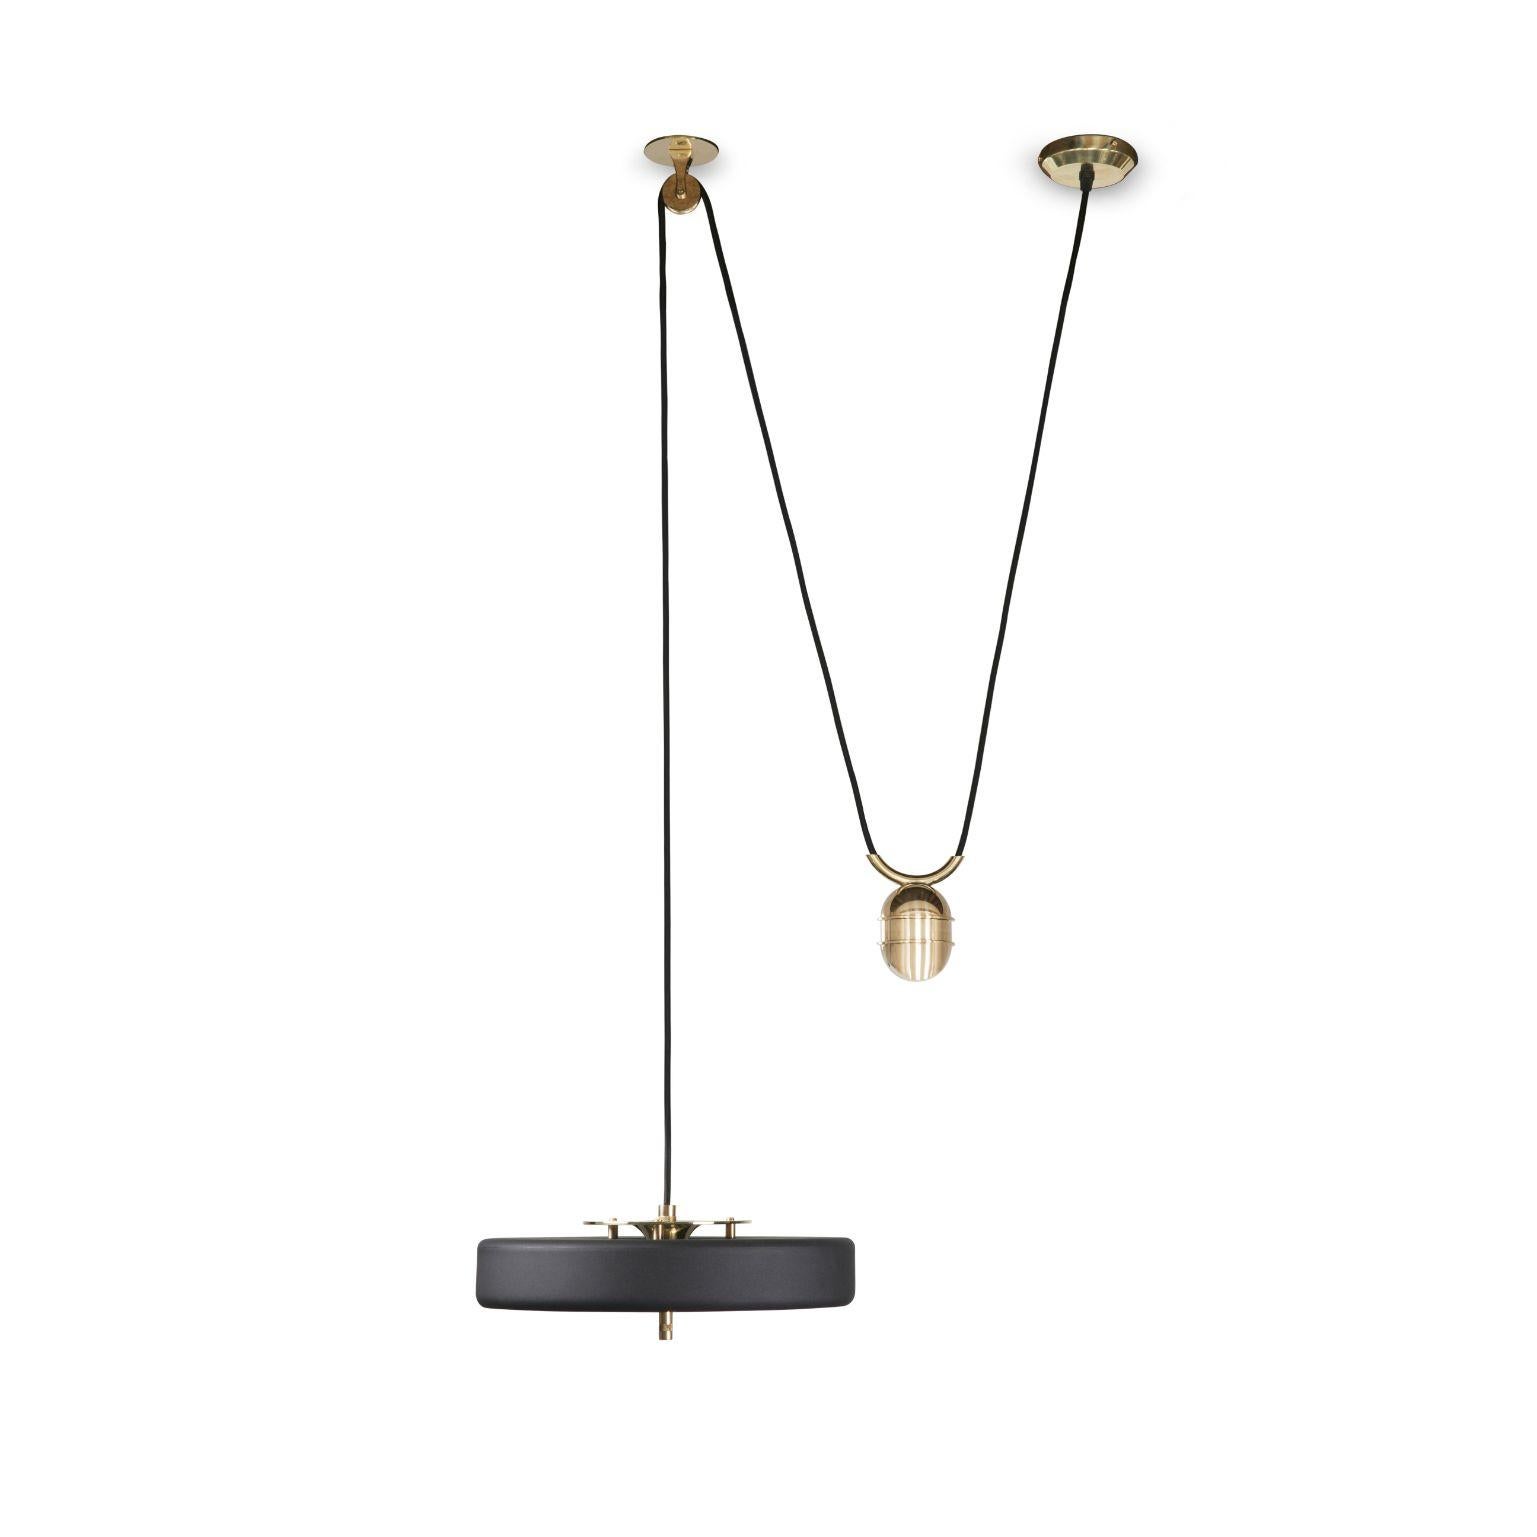 Revolve rise and fall pendant light - Brushed brass - Black by Bert Frank
Dimensions: 30 x 35 x 11 cm, small lamp: 7.6 cm
Materials: Brass, steel

Also available in polished brass
When Adam Yeats and Robbie Llewellyn founded Bert Frank in 2013